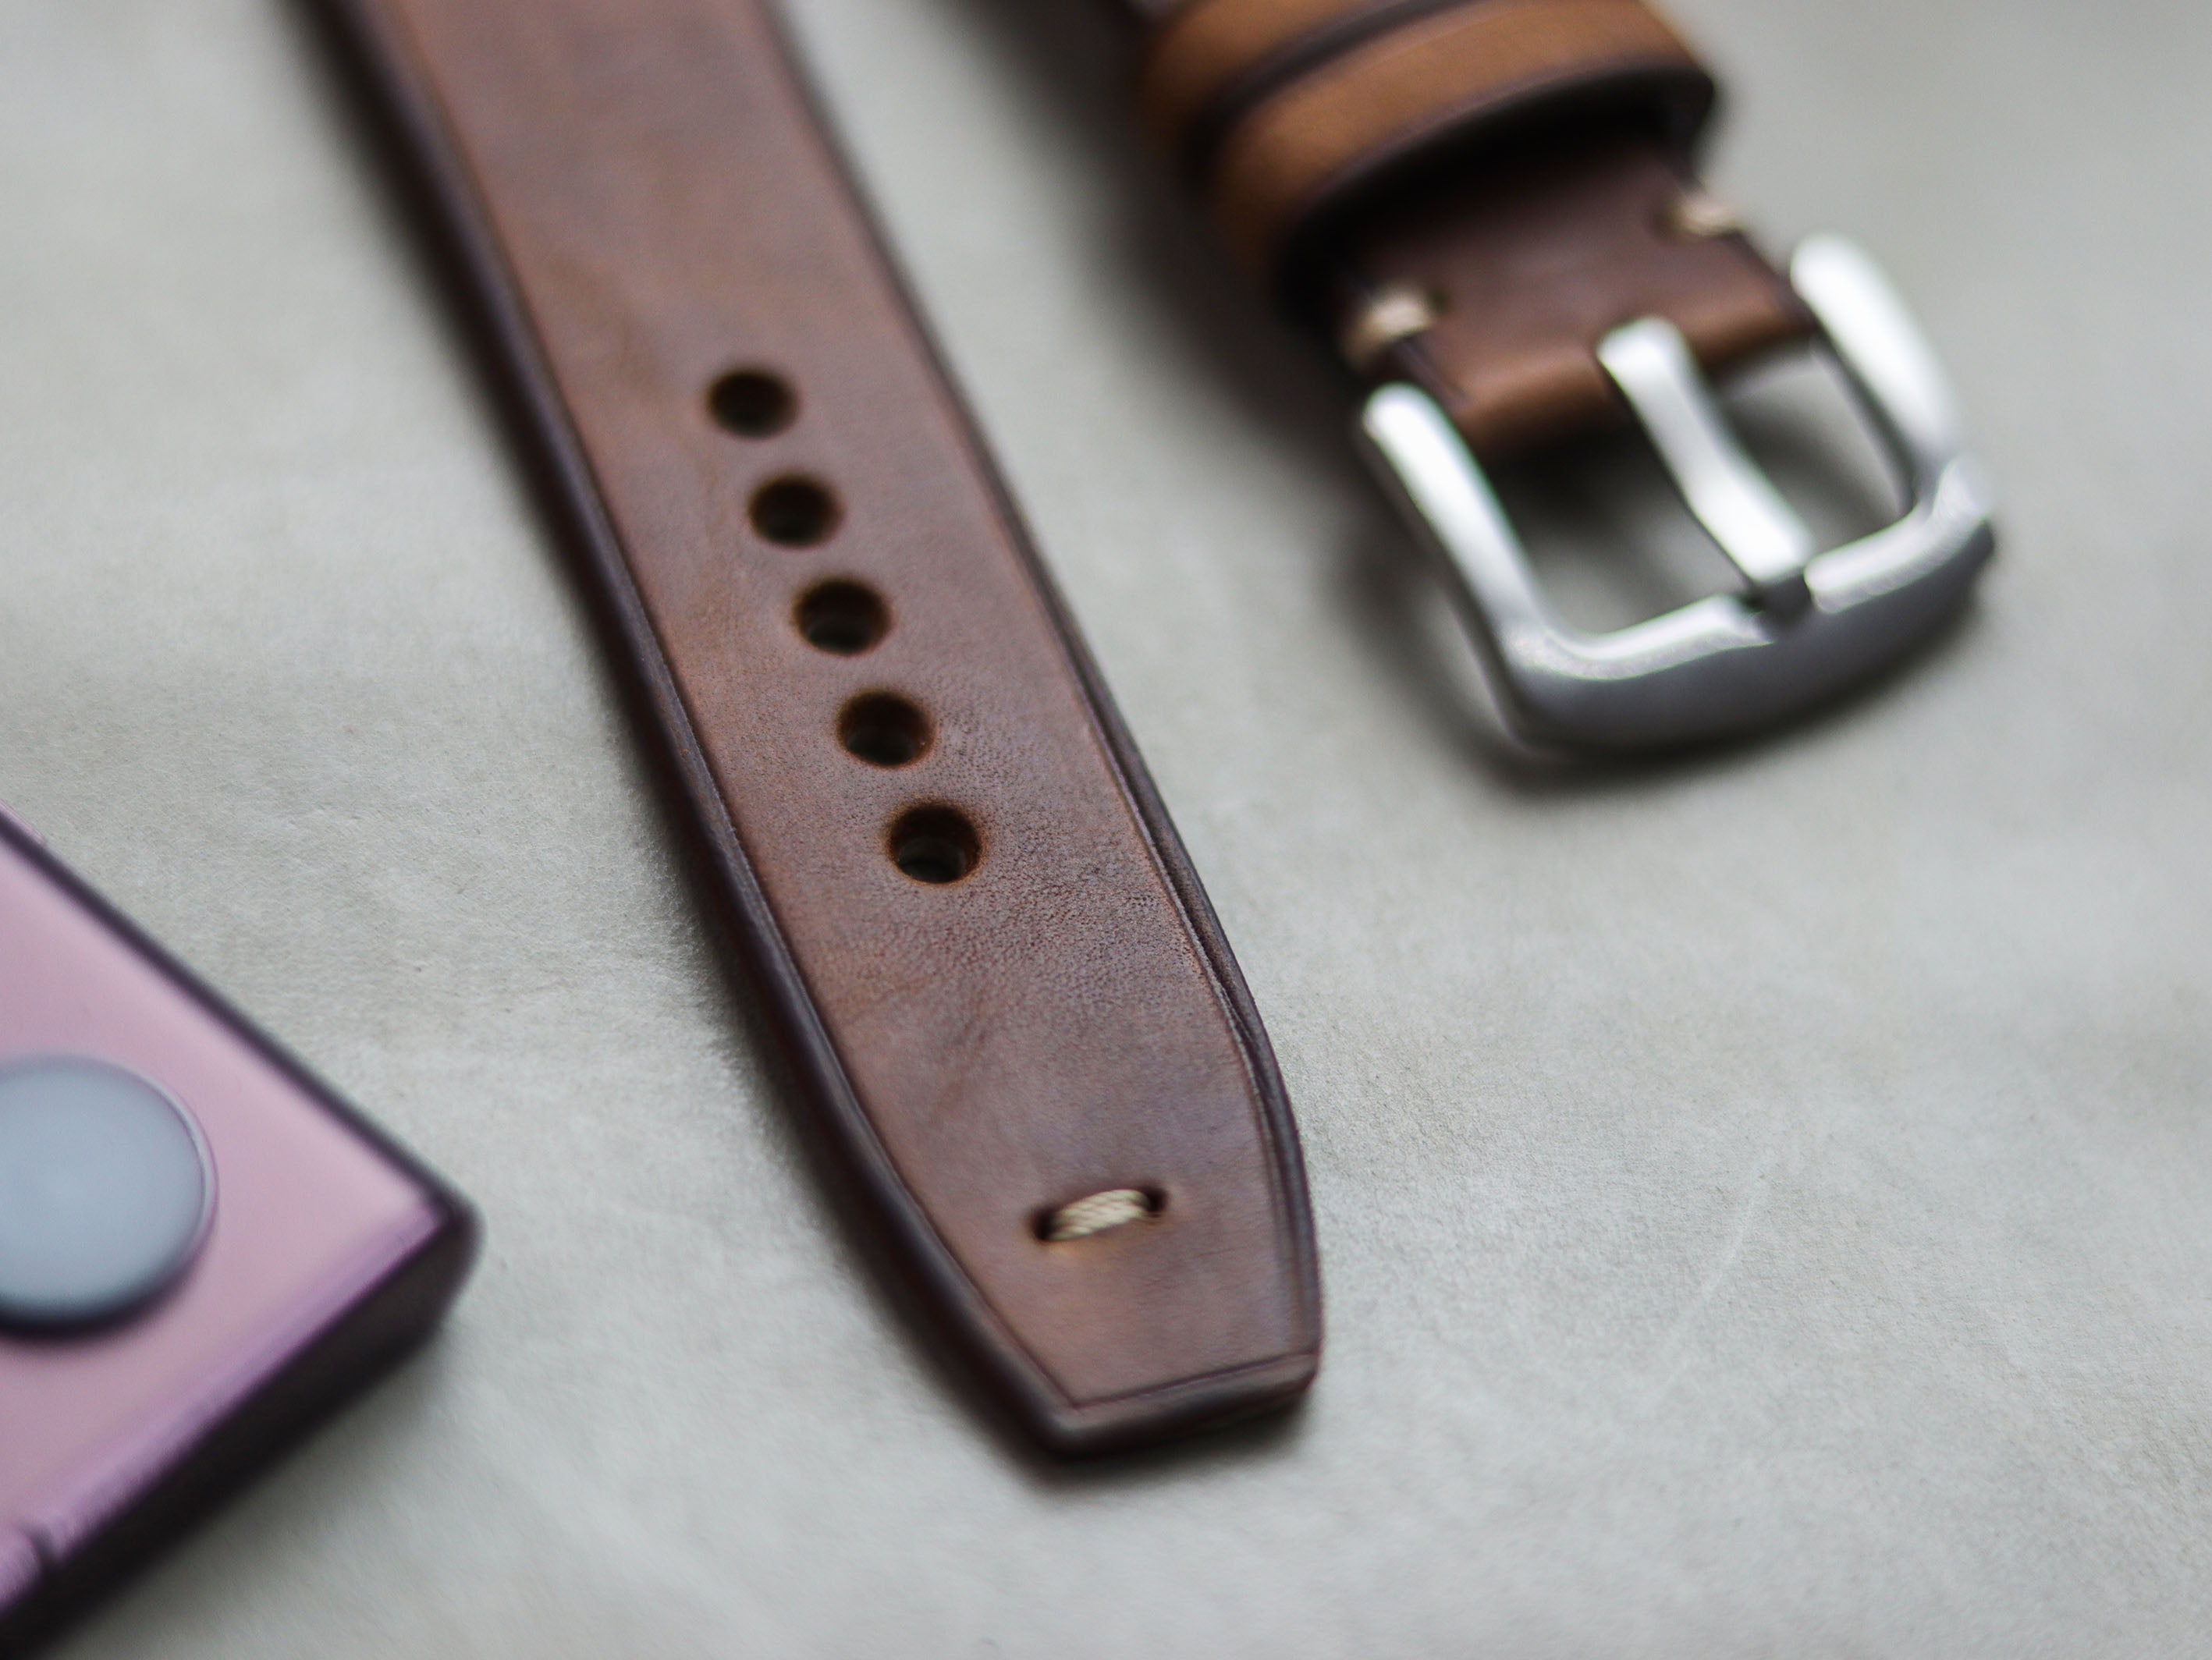 RUSTY BROWN HAND-CRAFTED WATCH STRAPS - MINIMAL STITCHED